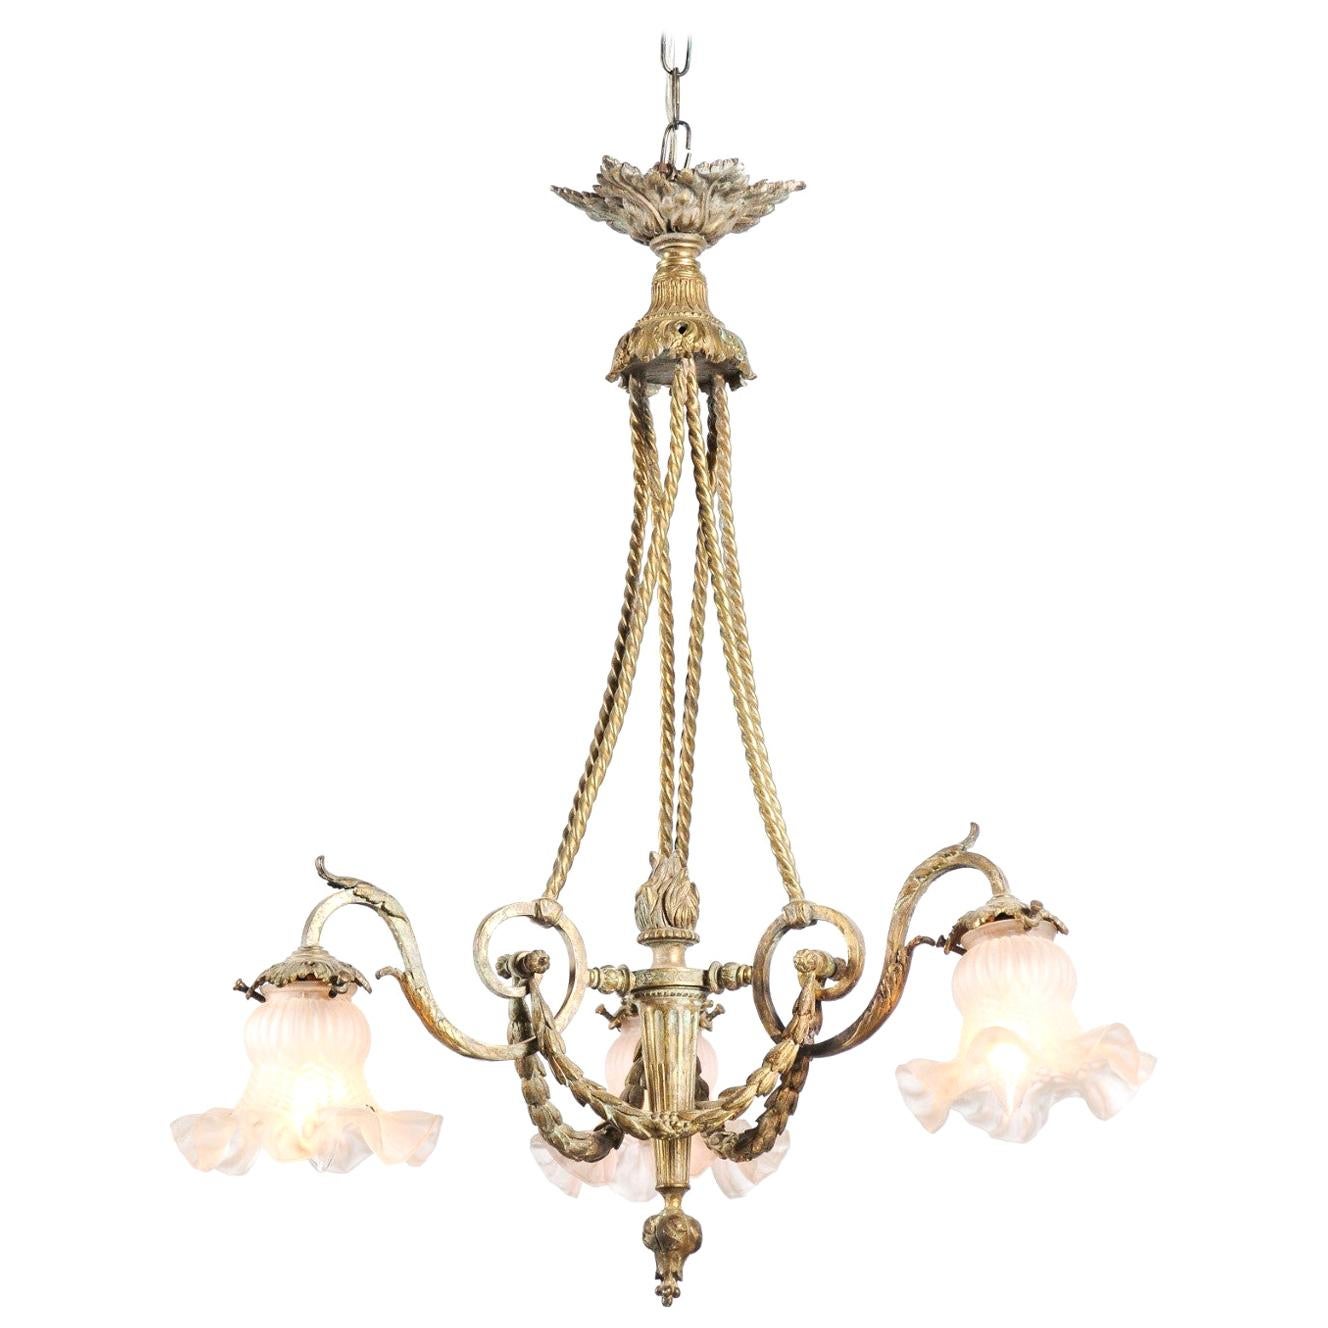 French Louis XVI Style 19th Century Bronze Three-Light Chandelier with Torch For Sale